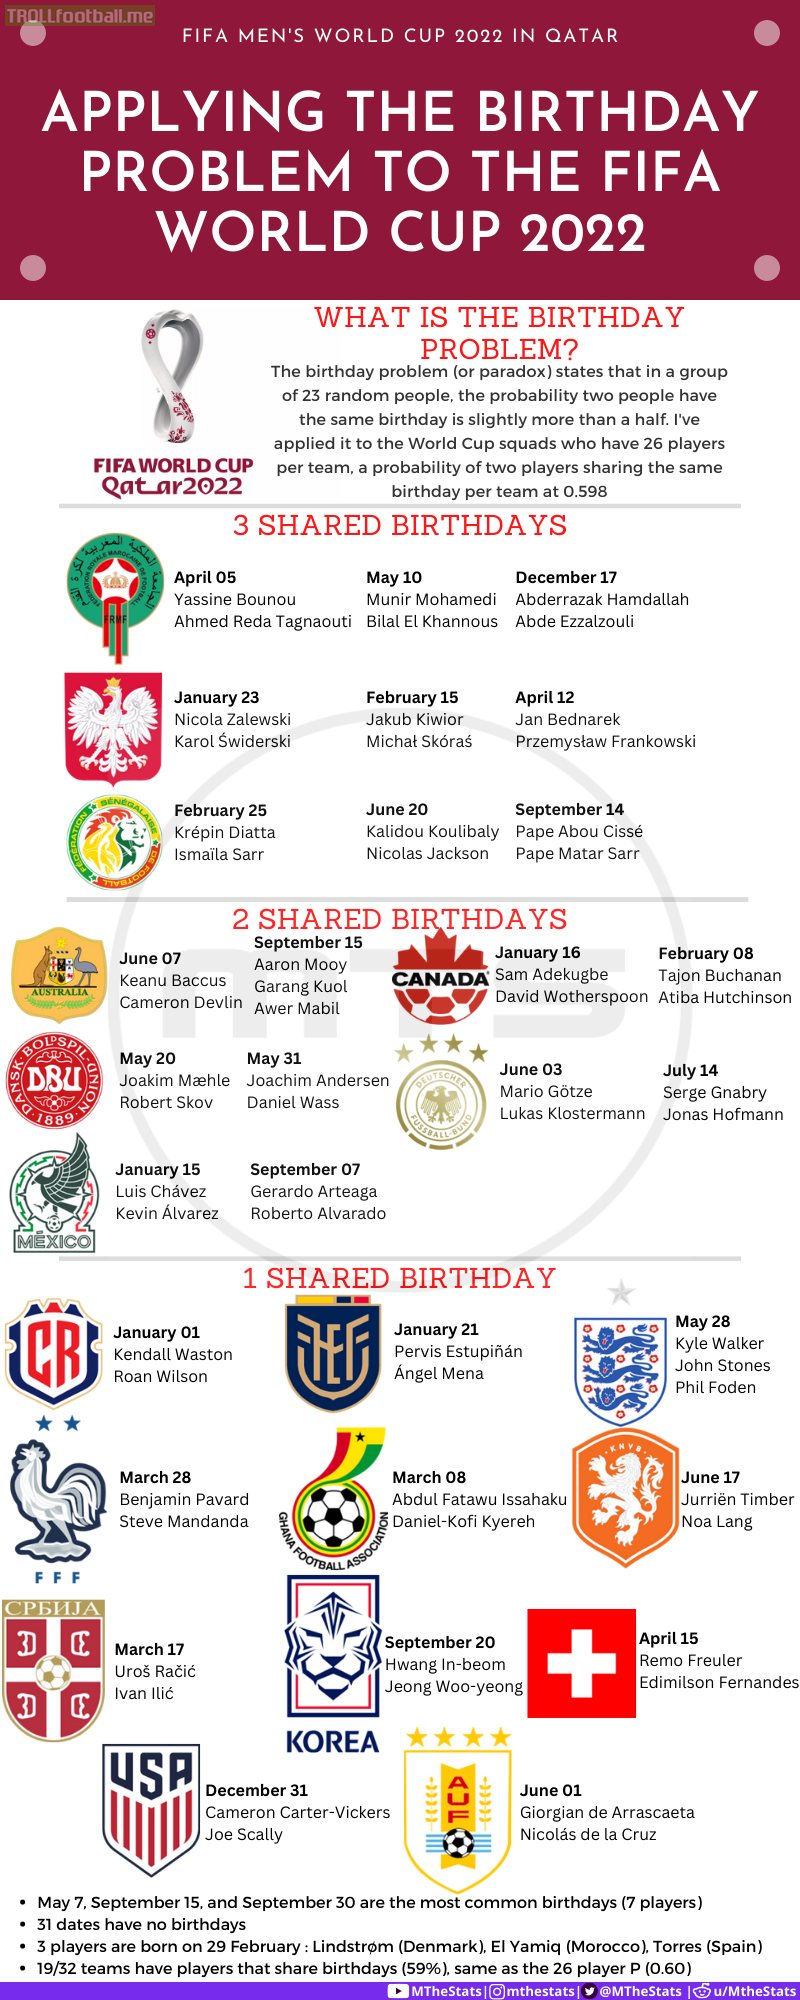 Applying the birthday problem to the FIFA Men's World Cup 2022